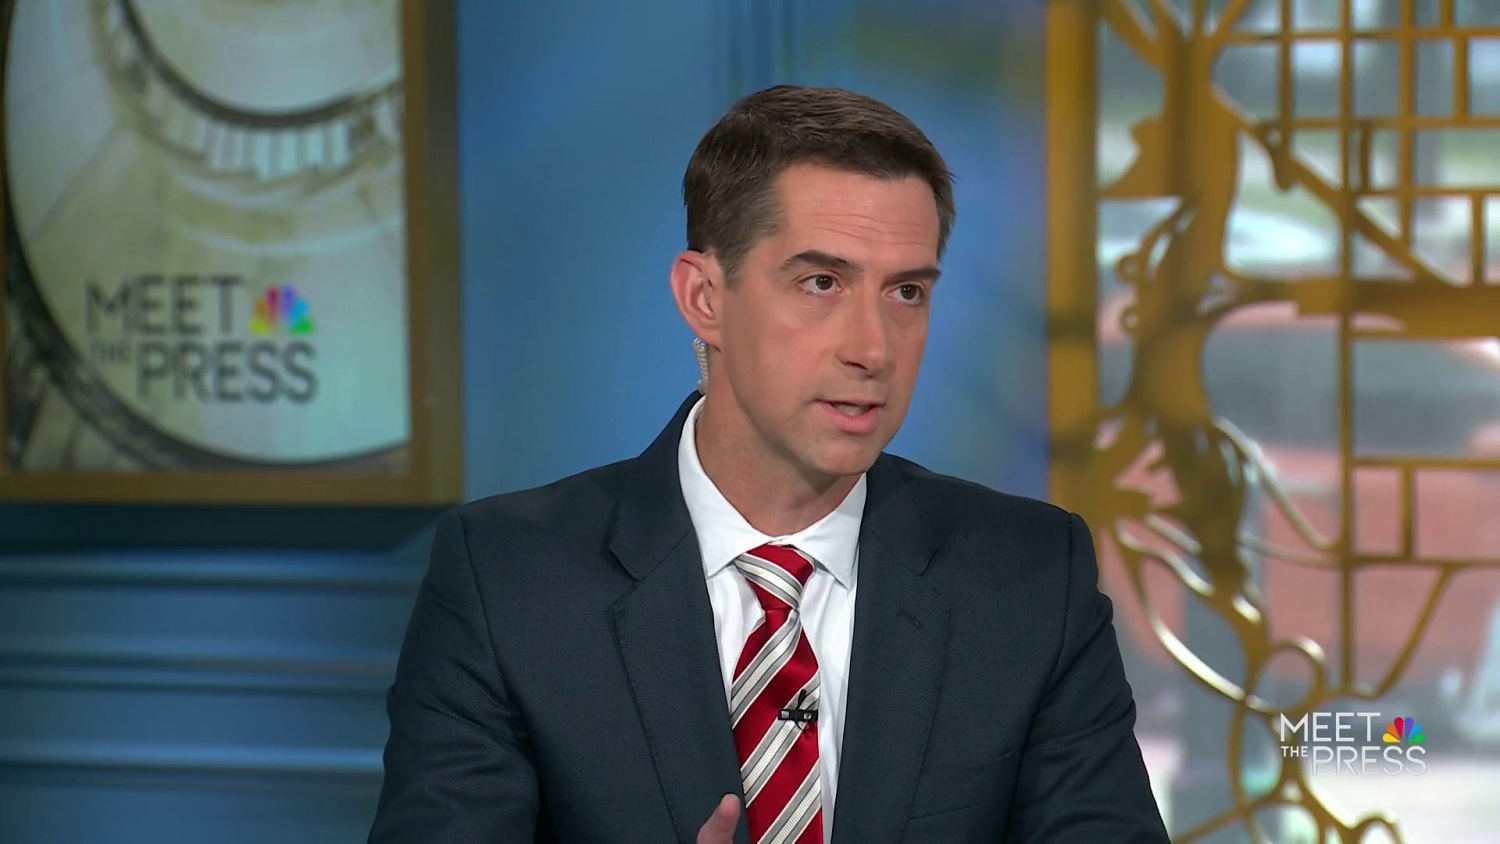 Sen. Tom Cotton says he has not spoken to Trump or campaign about VP selection